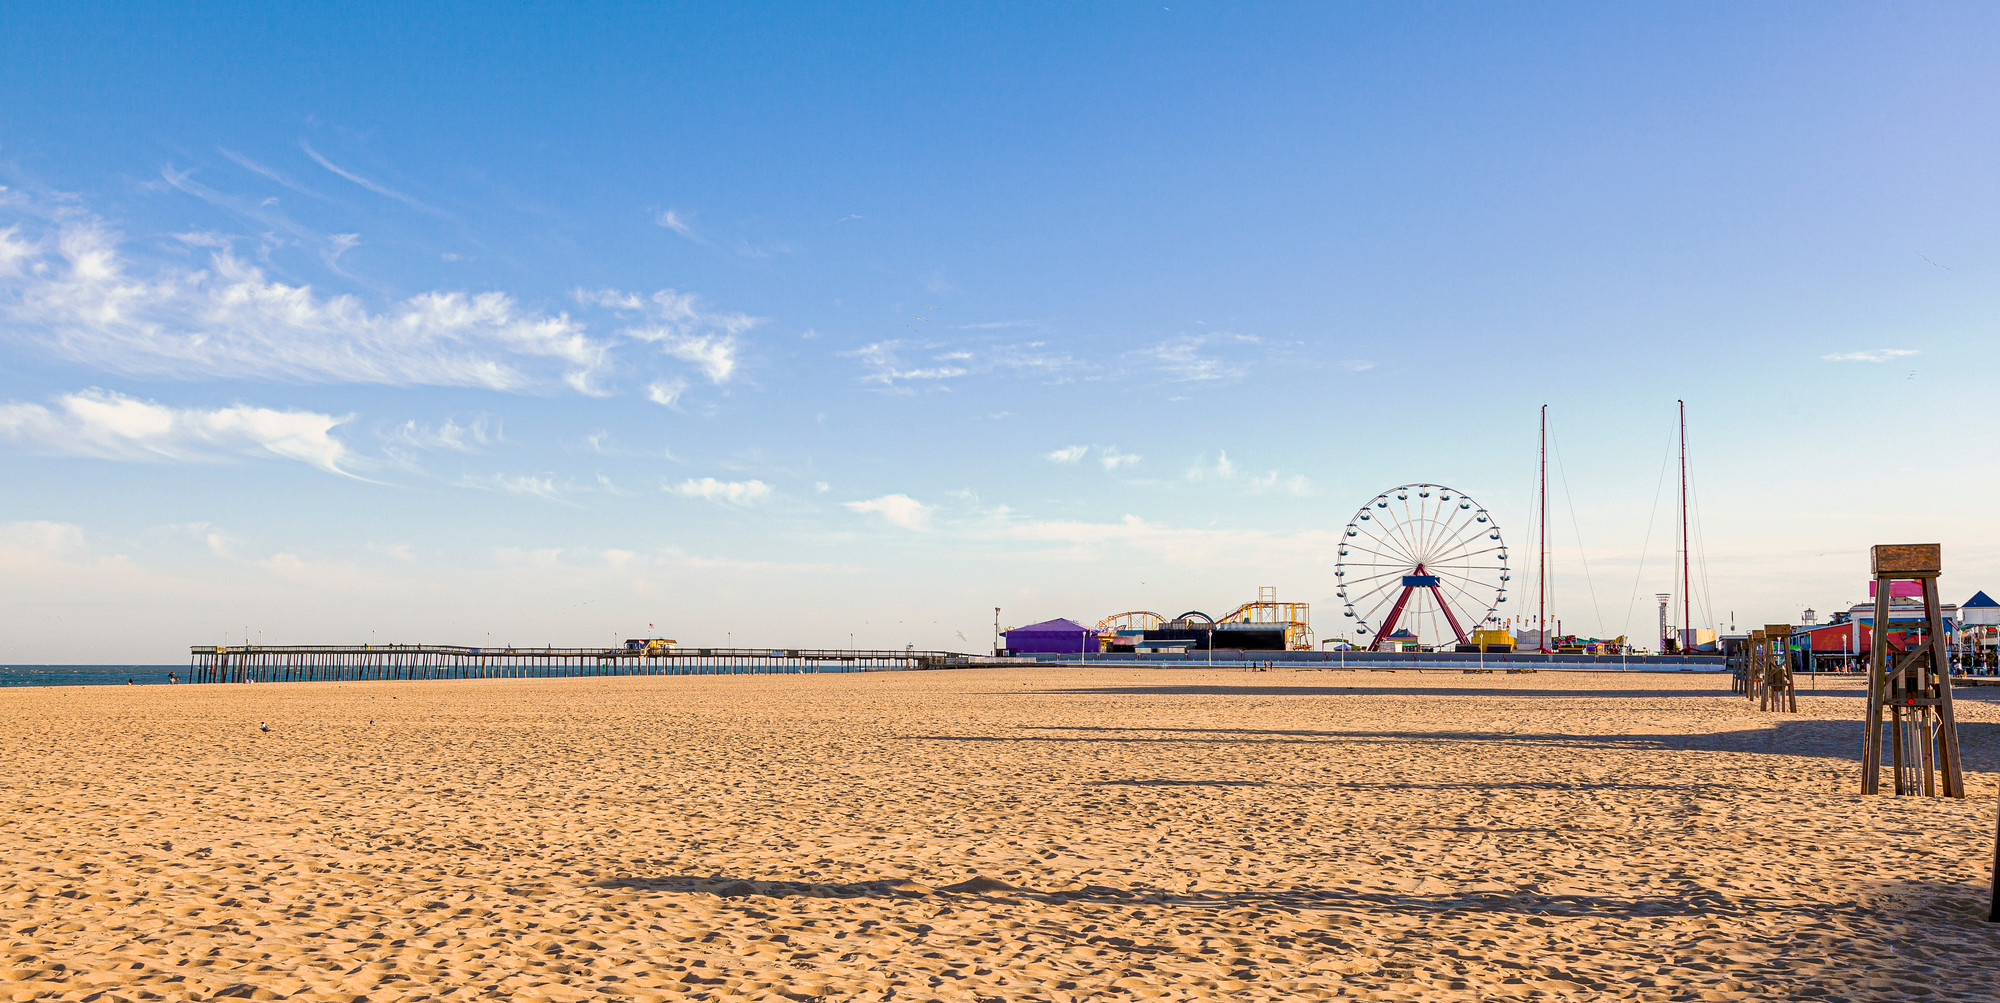 Empty beach with sand in full view and blue sky with amusement park in the distance.